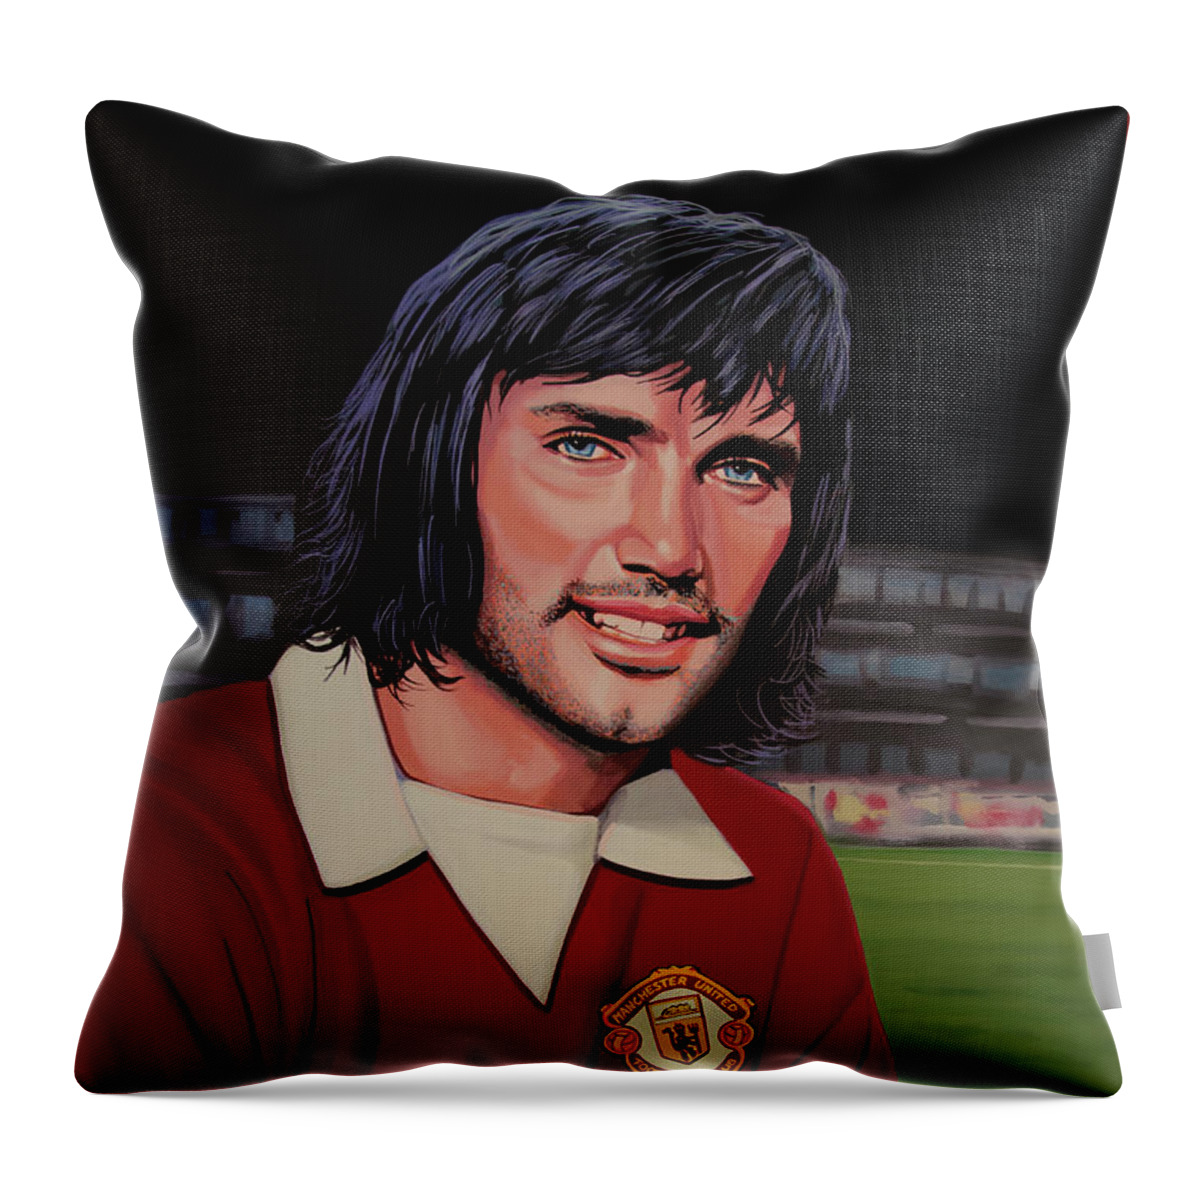 George Best Throw Pillow featuring the painting George Best Painting by Paul Meijering